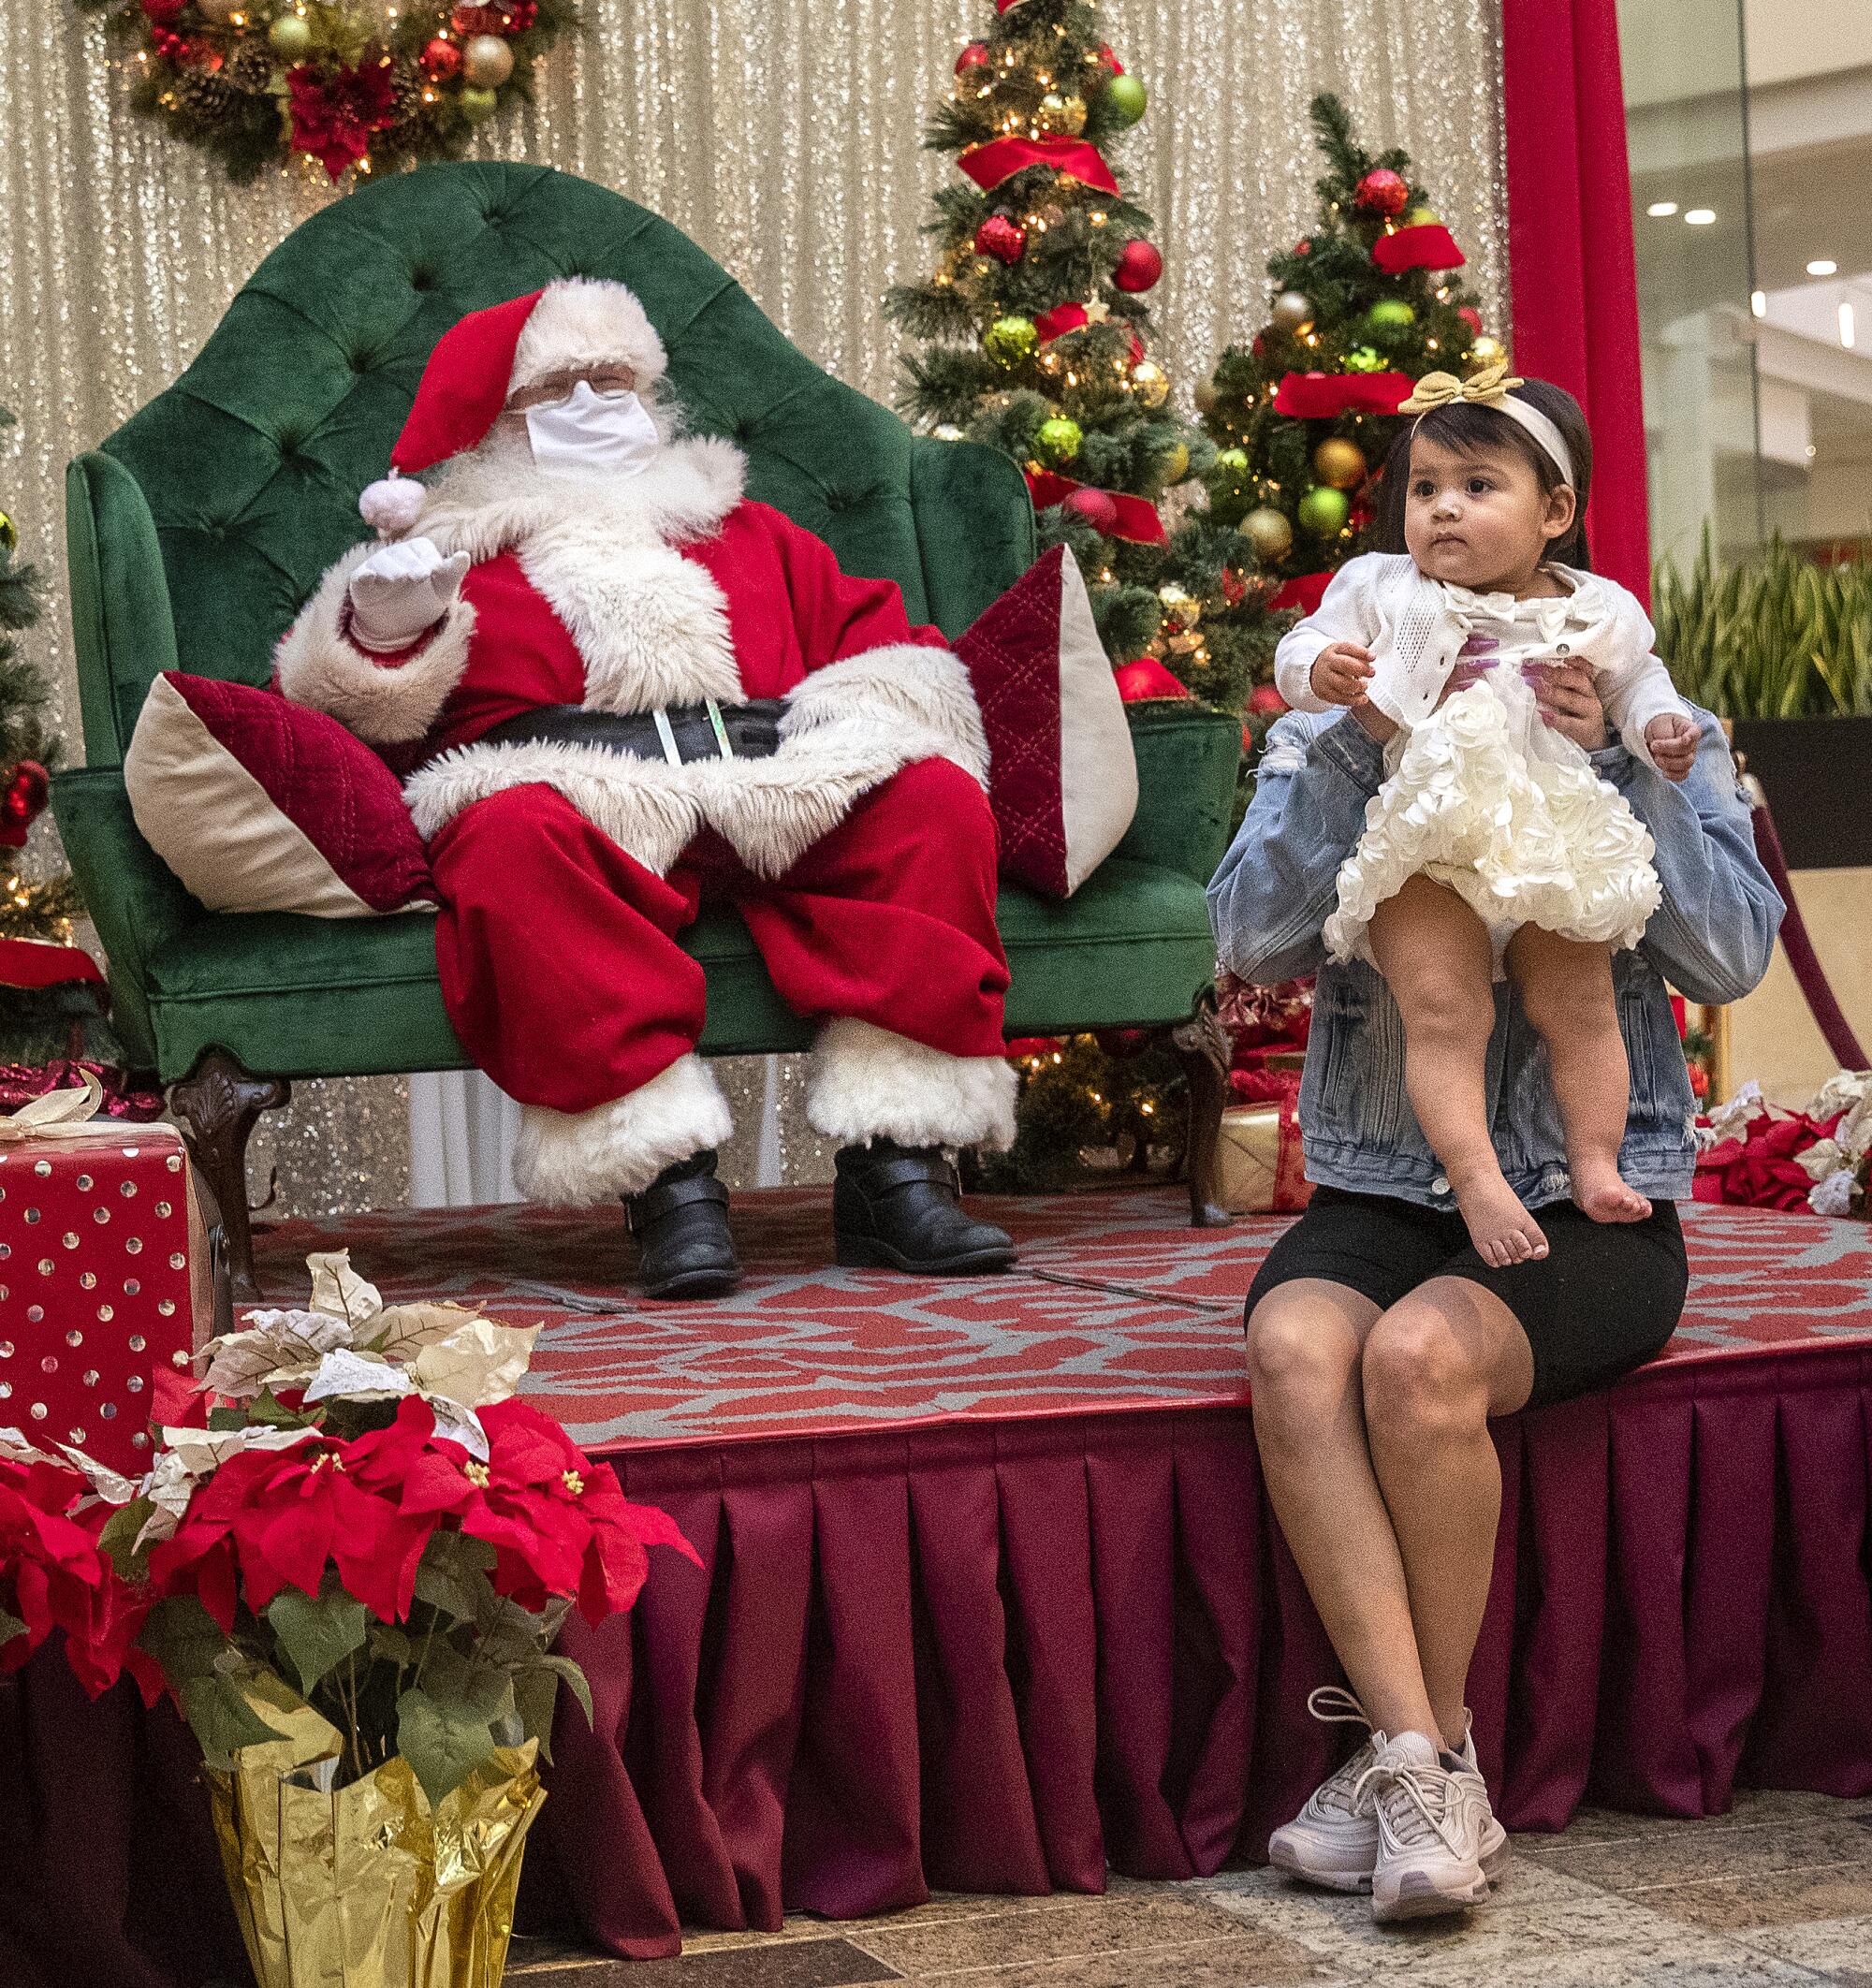 Aalie Godoy holds up her daughter, Alani Alvarez, 1, while being photographed in front of Santa Claus 